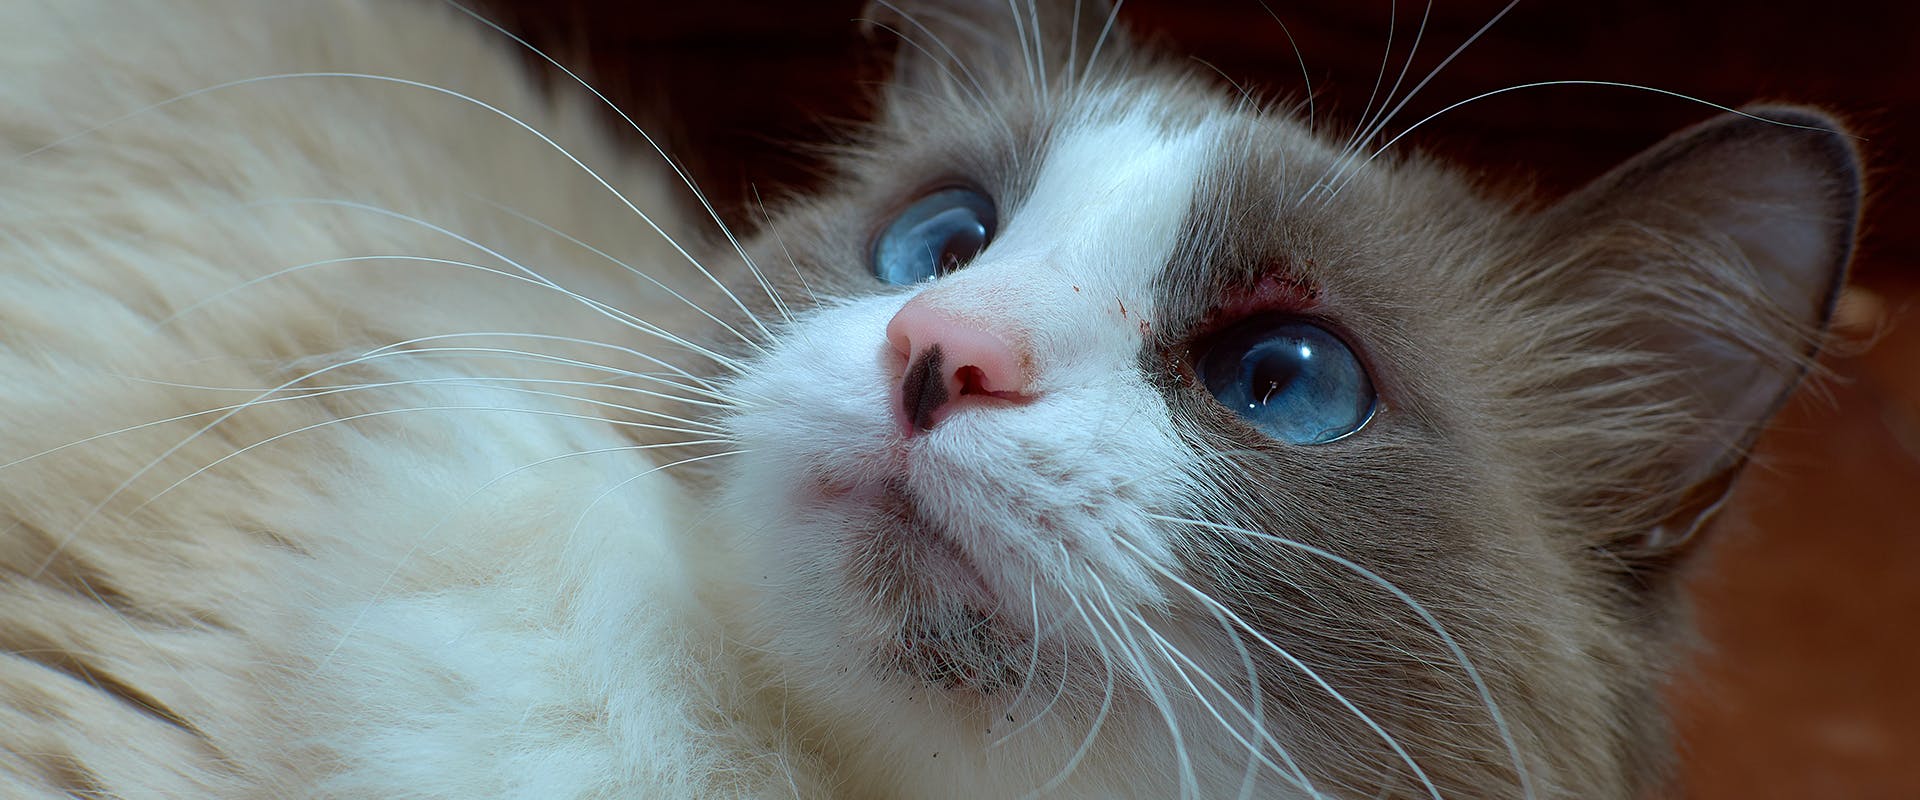 A cat with feline acne